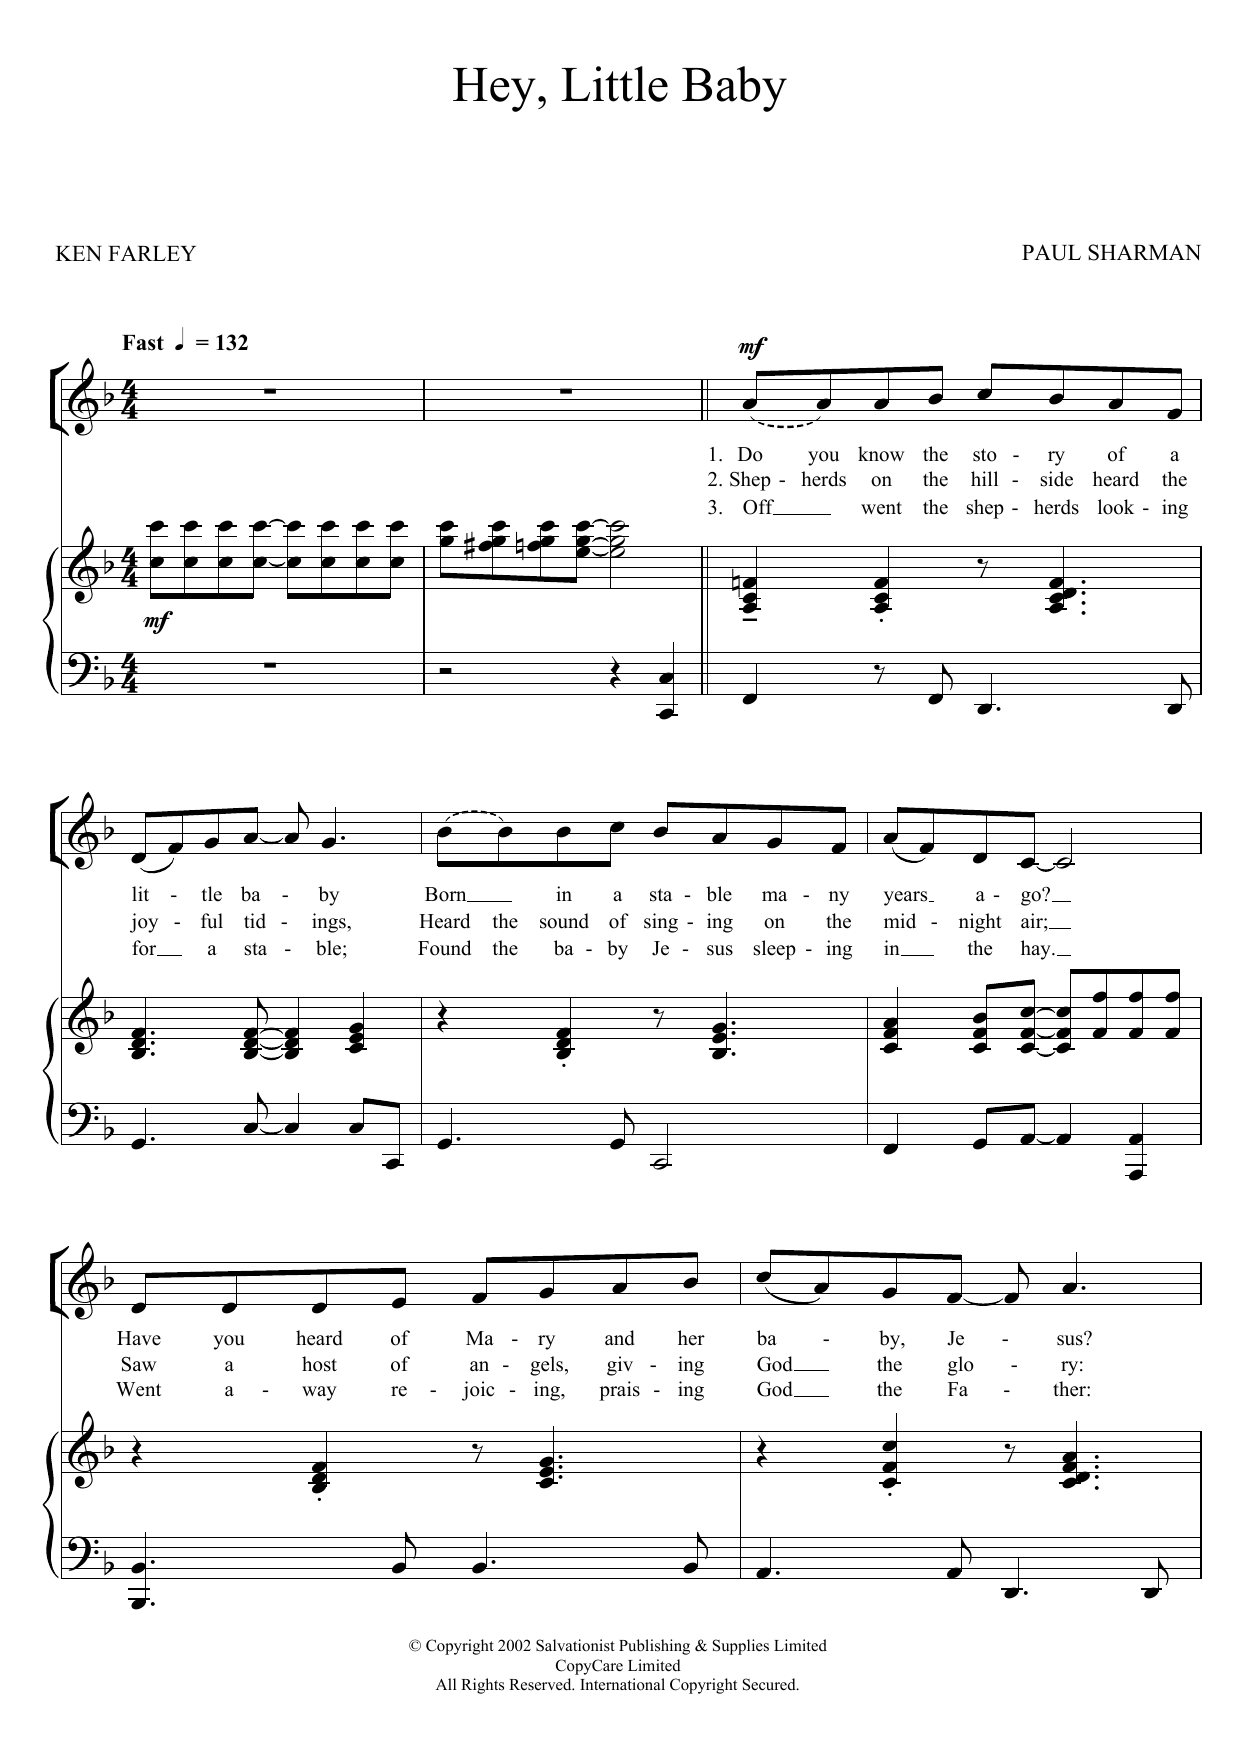 Download The Salvation Army Hey, Little Baby Sheet Music